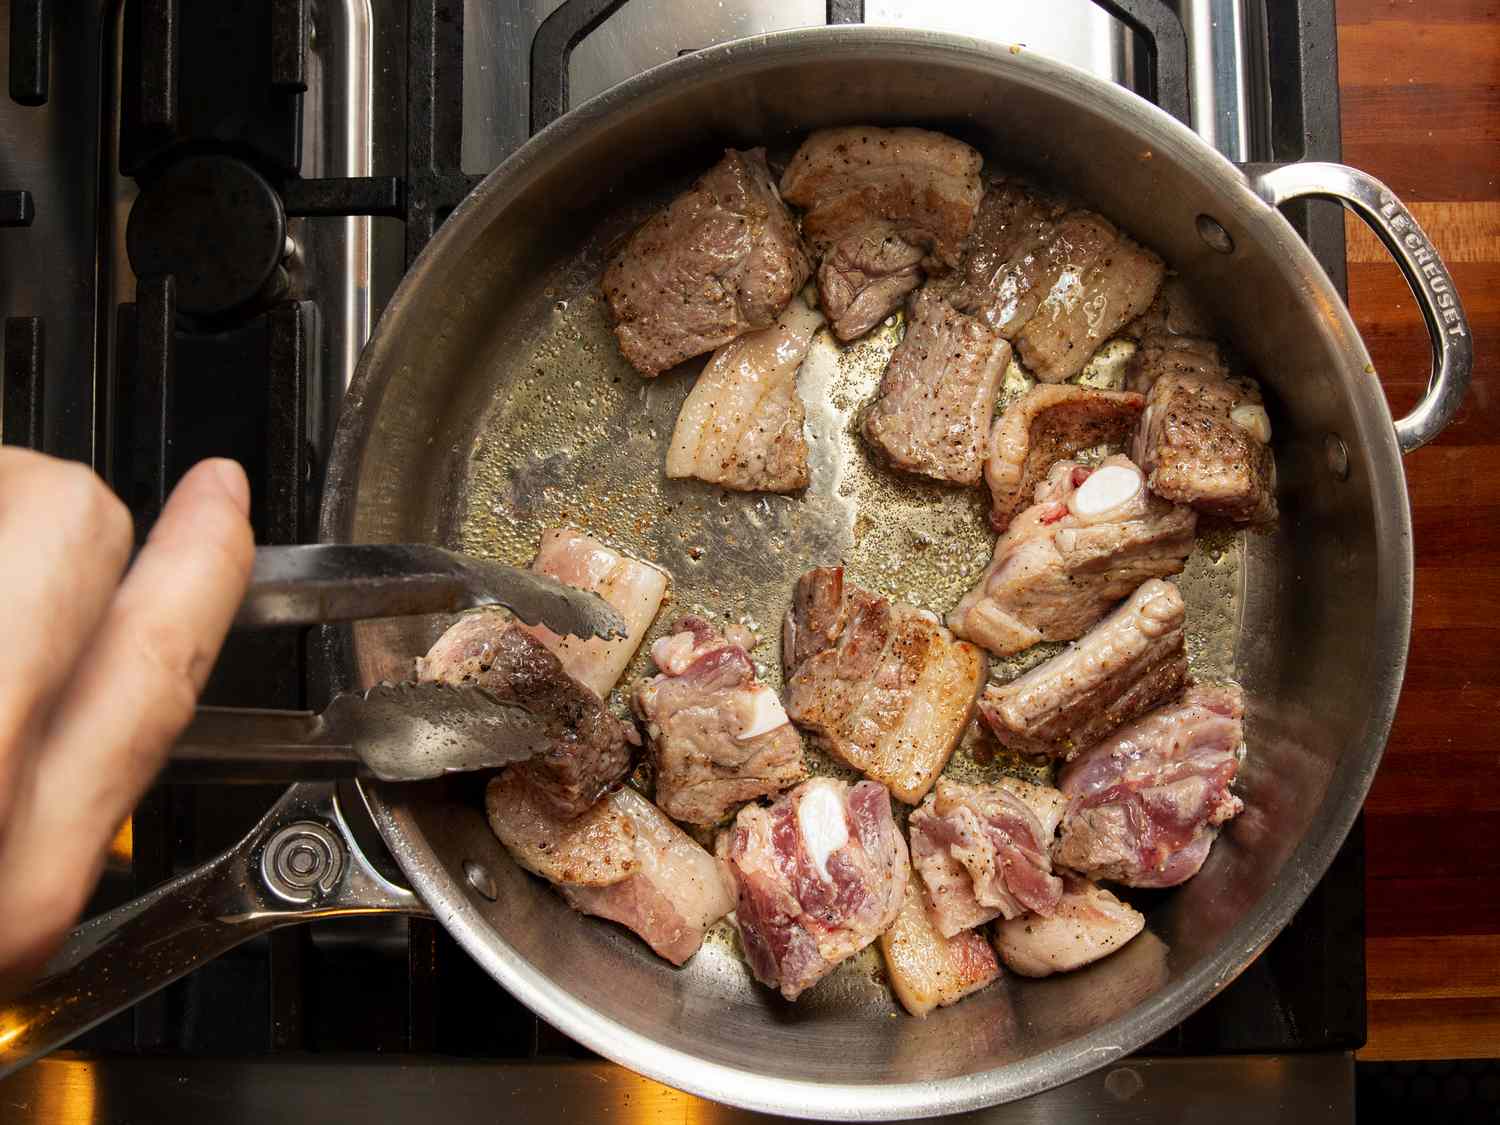 Overhead view of browning pork in pot